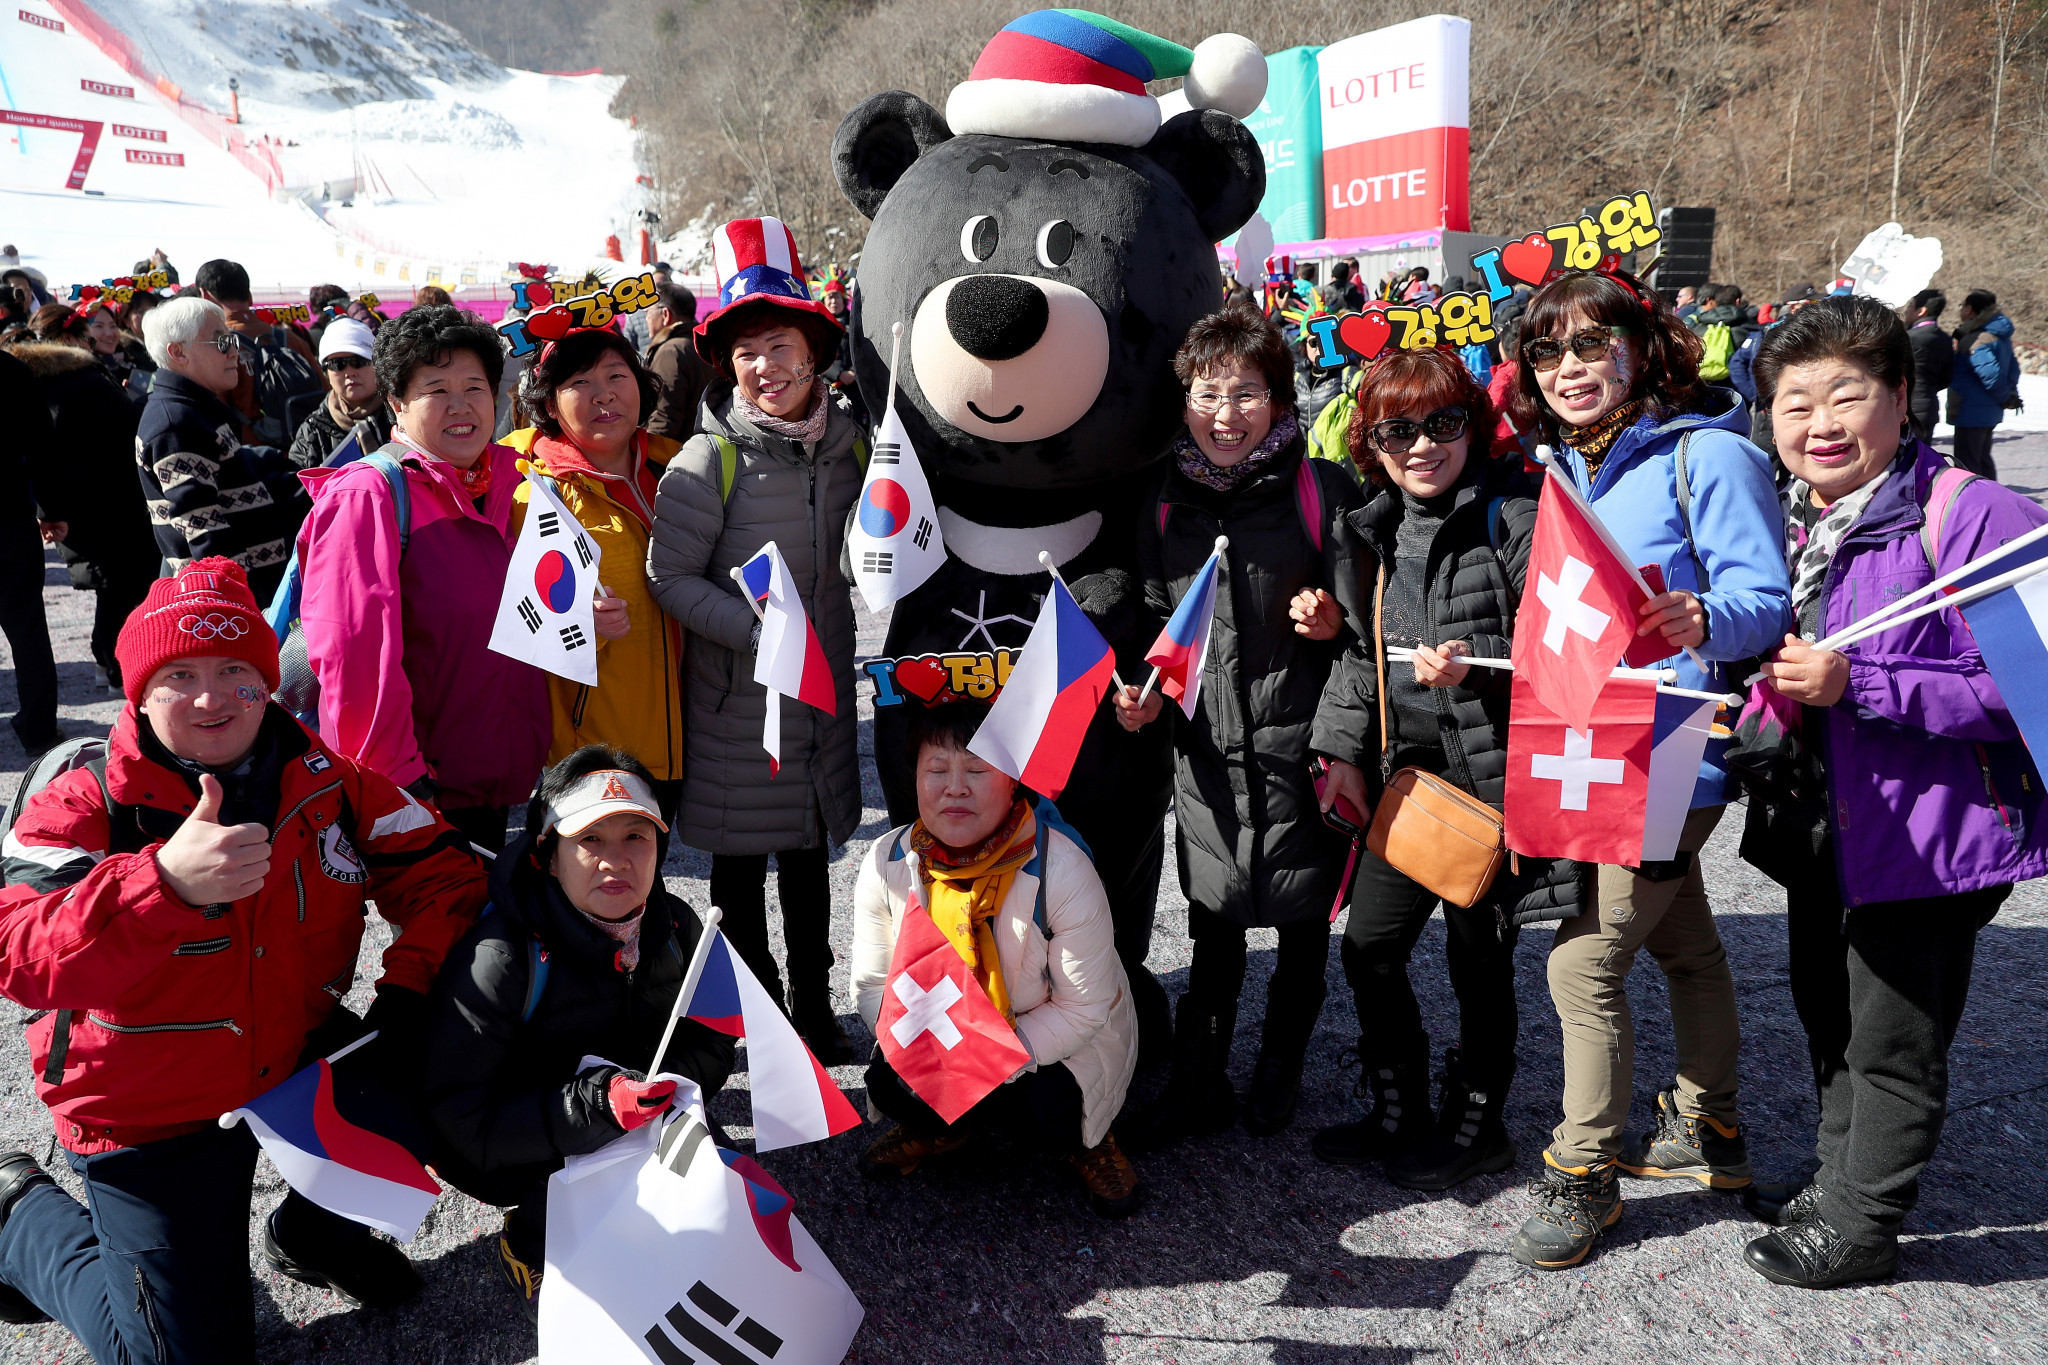 Foreign visitors for Pyeongchang 2018 will be able to extend their stay in South Korea ©Getty Images